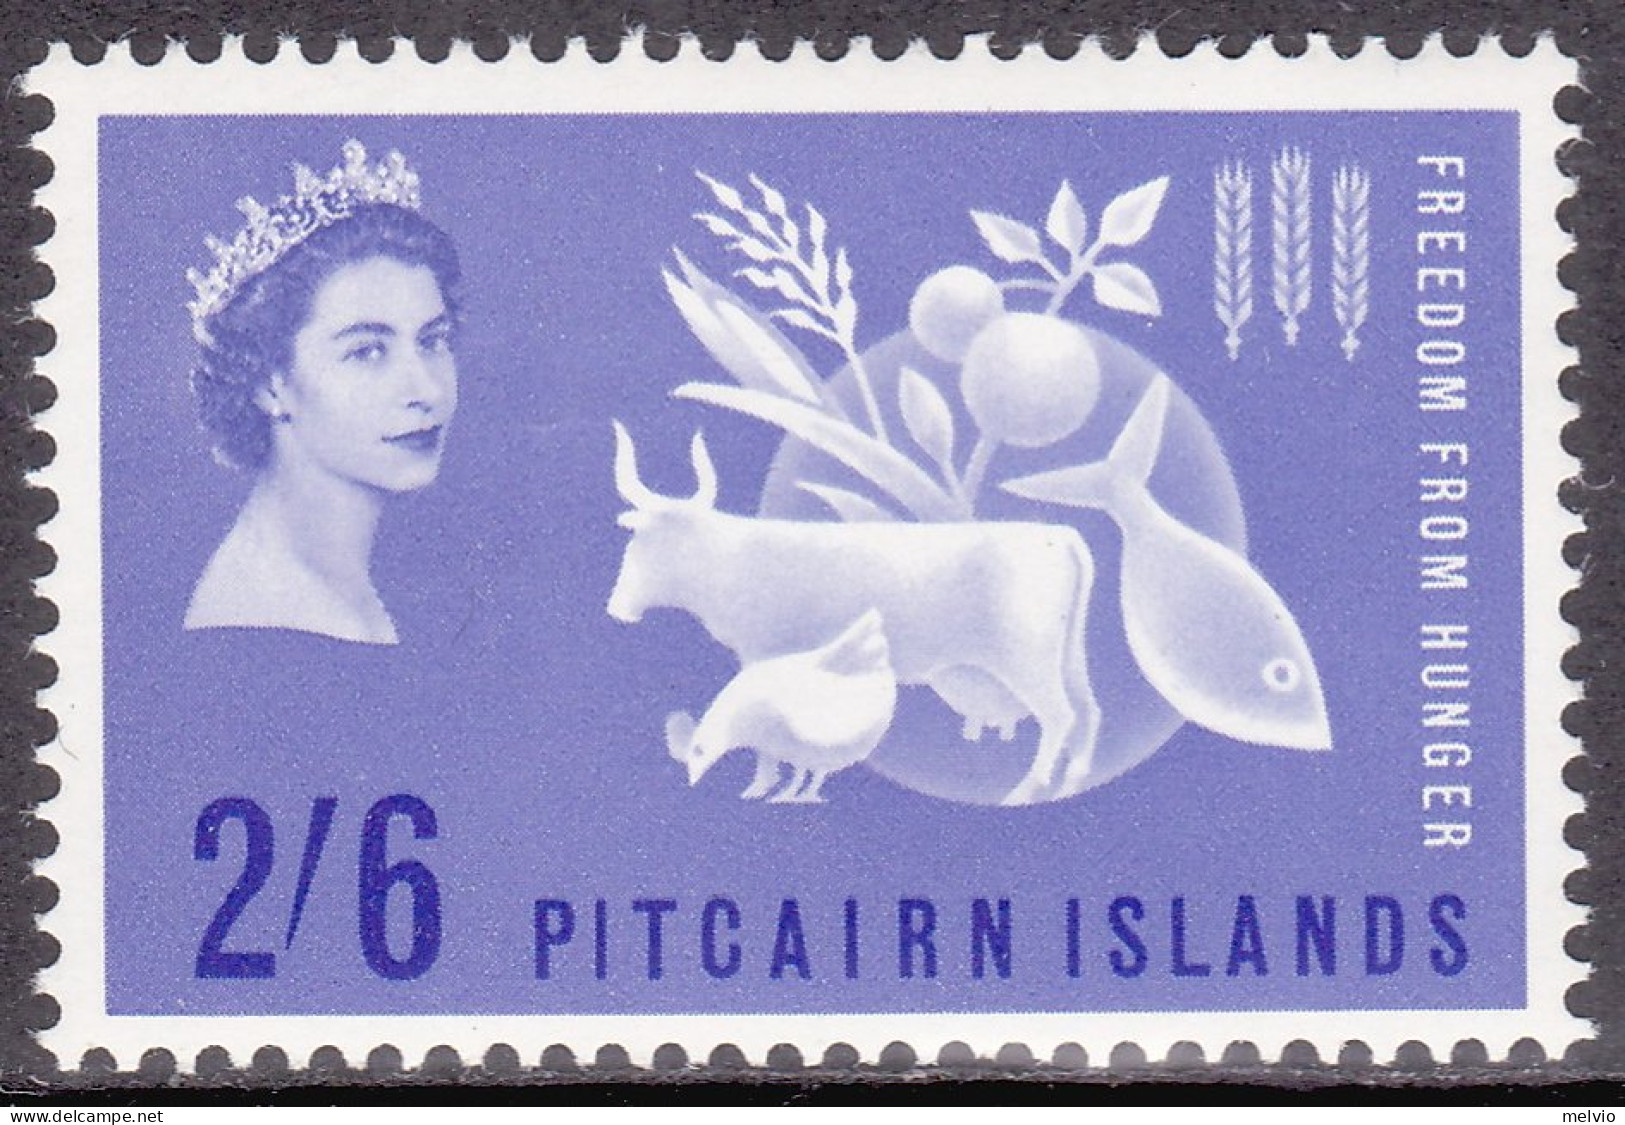 1963-Pitcairn Isole (MNH=**) S.1v."Campagna Contro La Fame" - Pitcairn